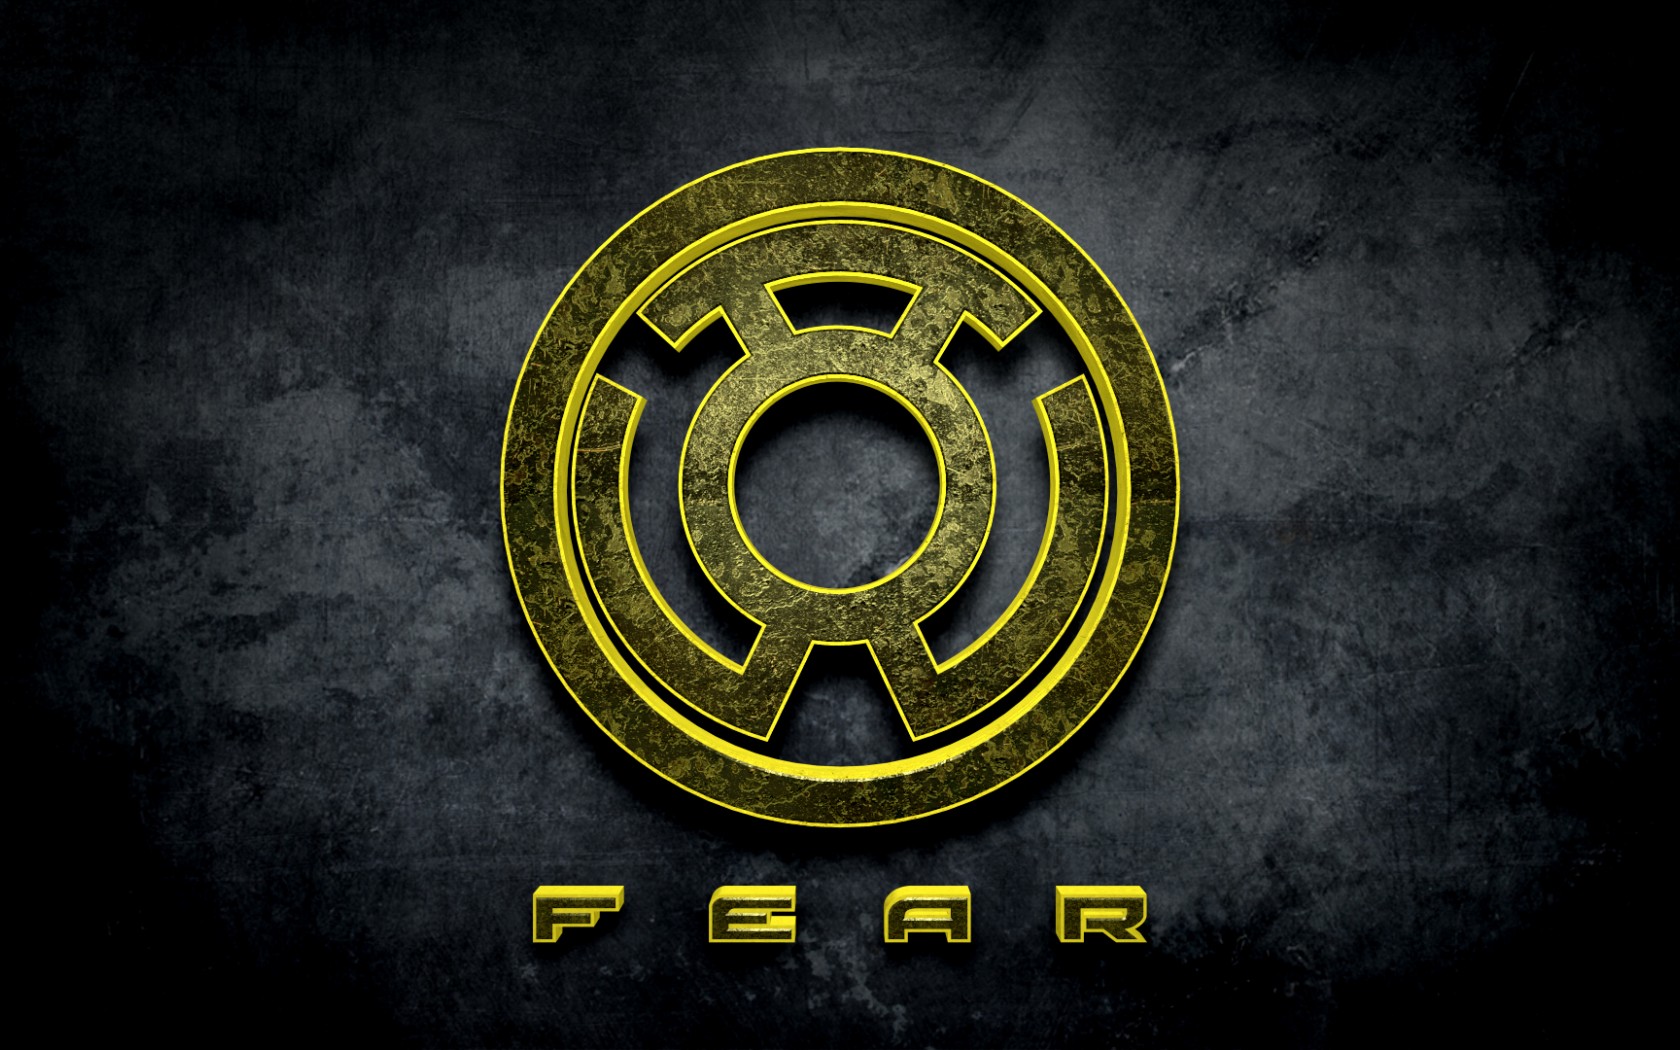 Yellow Lantern Corps Wallpaper And Background Image